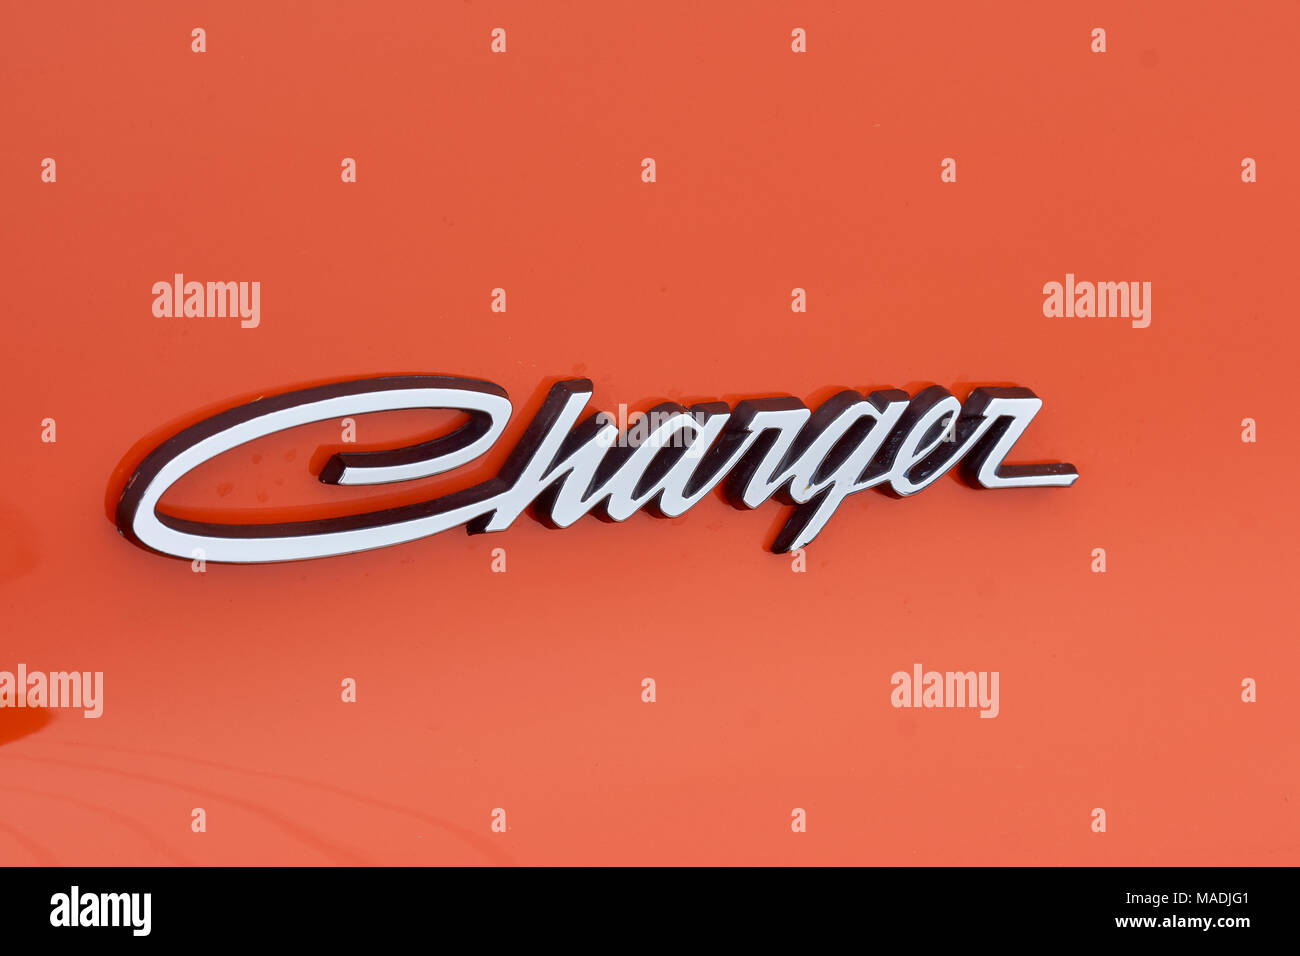 detail image of an orange dodge charger r/t Stock Photo